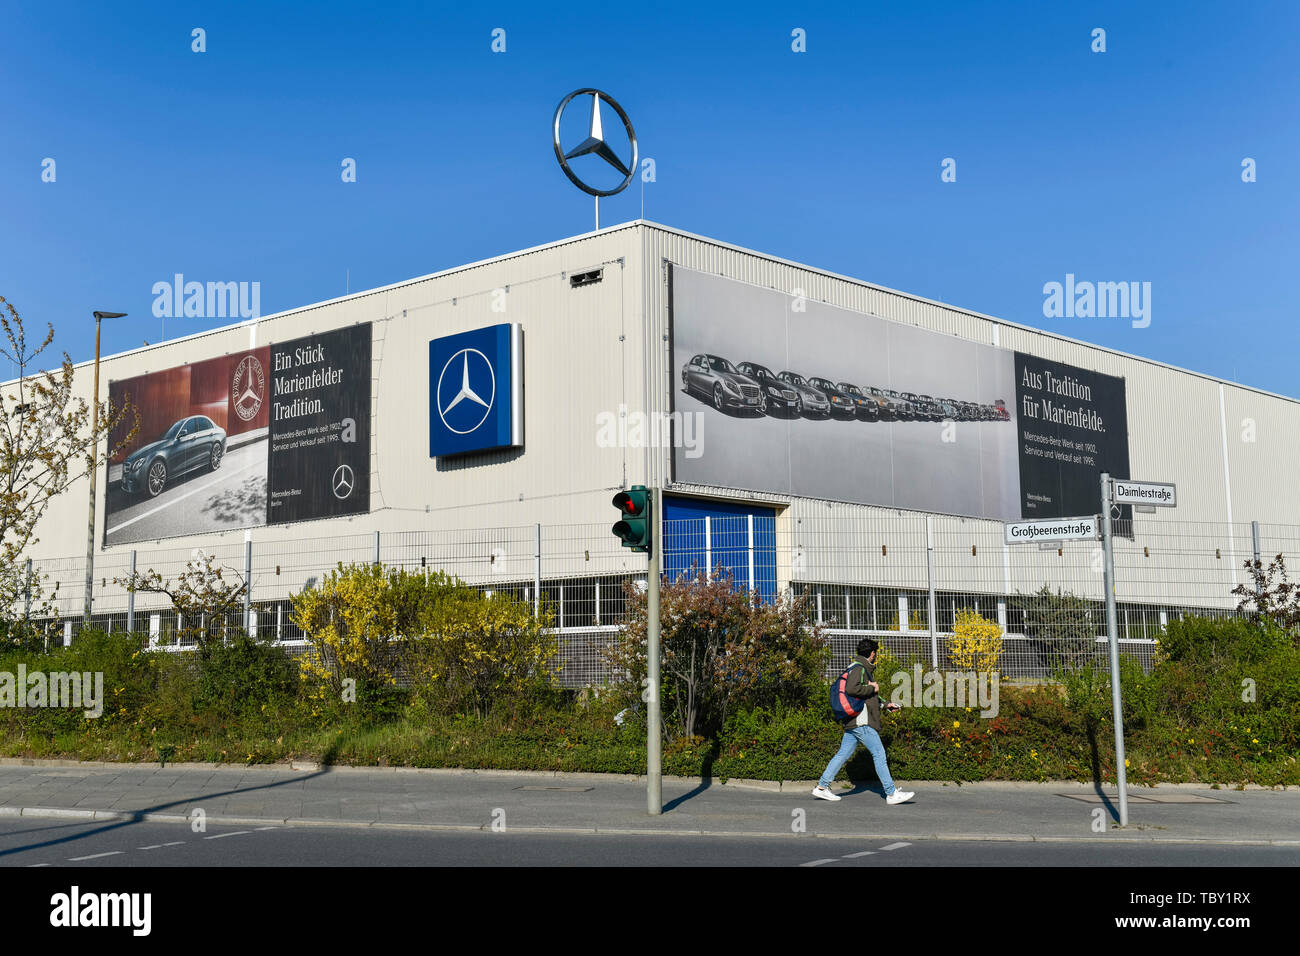 Mercedes Benz work, Daimlerstrasse, to Marien's field, temple court nice mountain, Berlin, Germany, Mercedes Benz Werk, Daimlerstraße, Marienfelde, Te Stock Photo